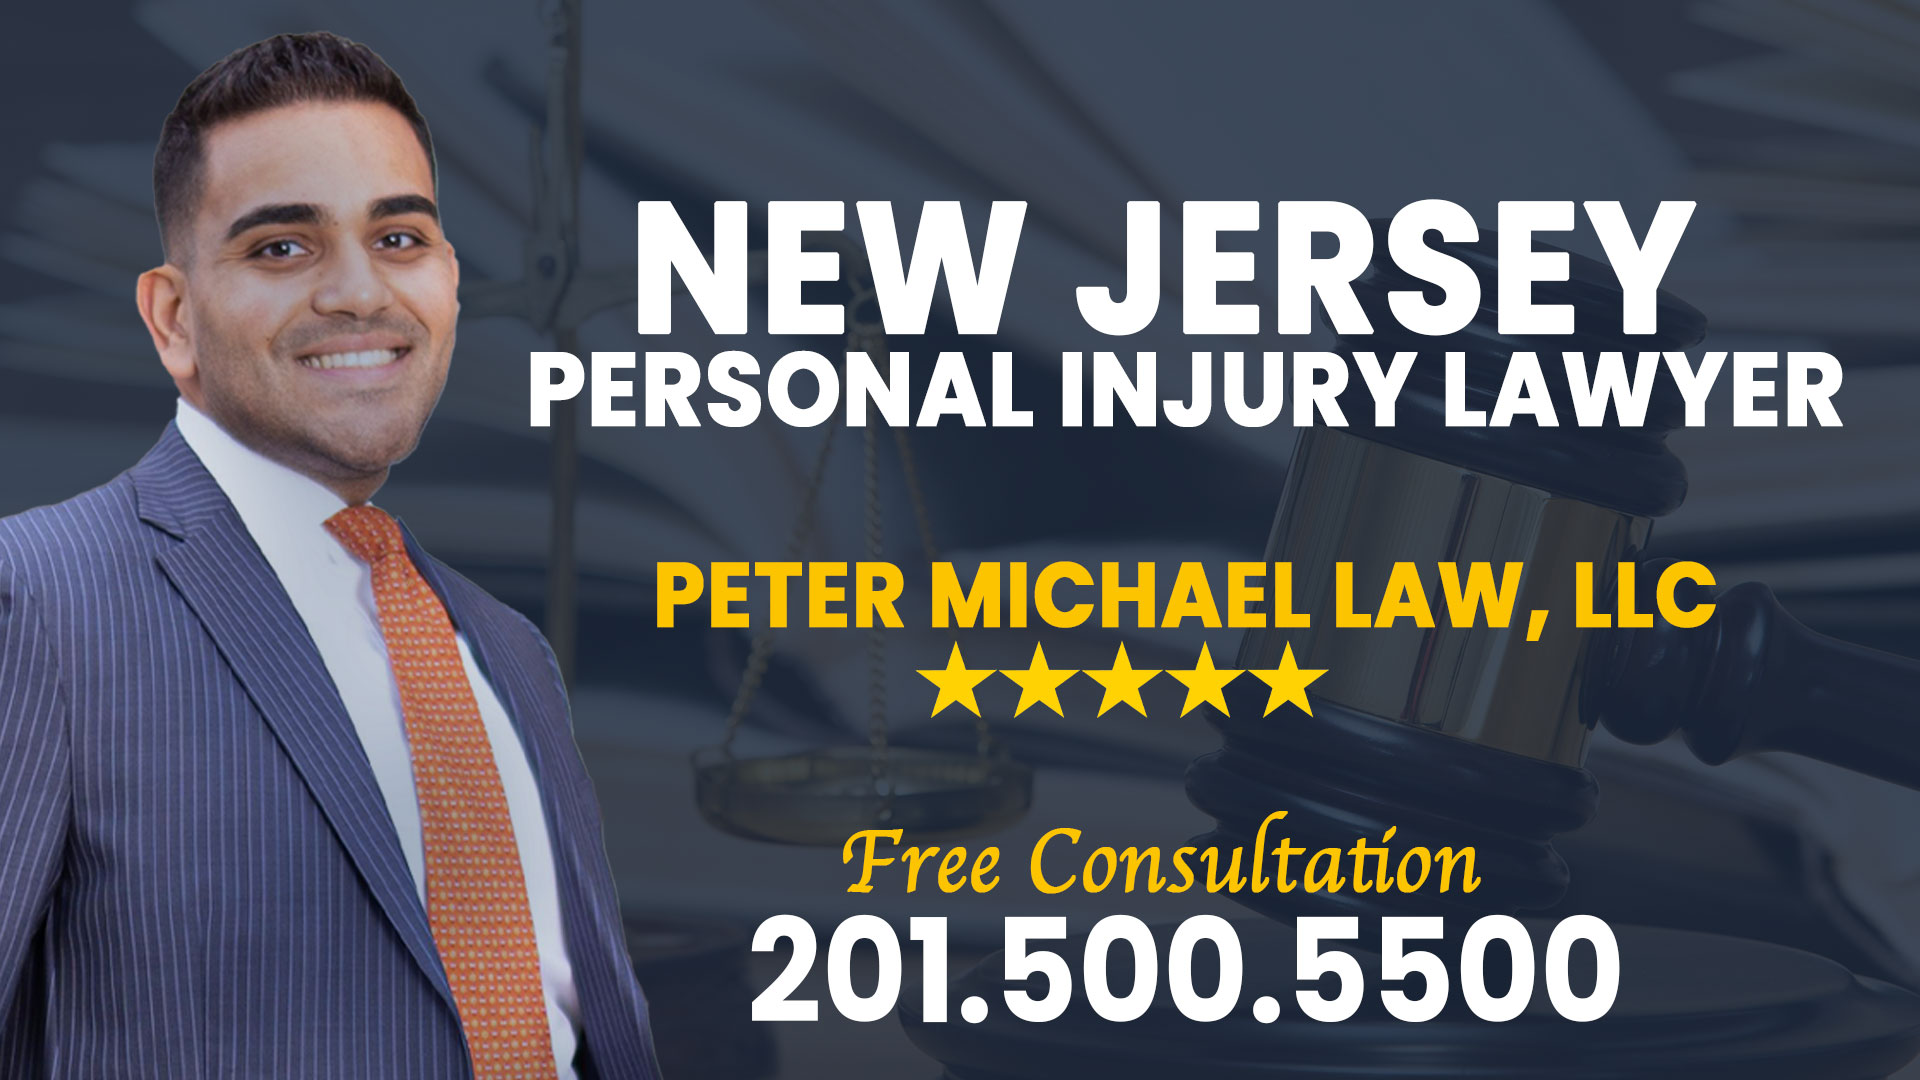 Experienced New Jersey Personal Injury Lawyer, Peter Michael Law, LLC NJ Accident & Injury Lawyers - Top-Rated NJ Injury Lawyers for Car Accident, Slip and fall accident, Nursing Home Neglect